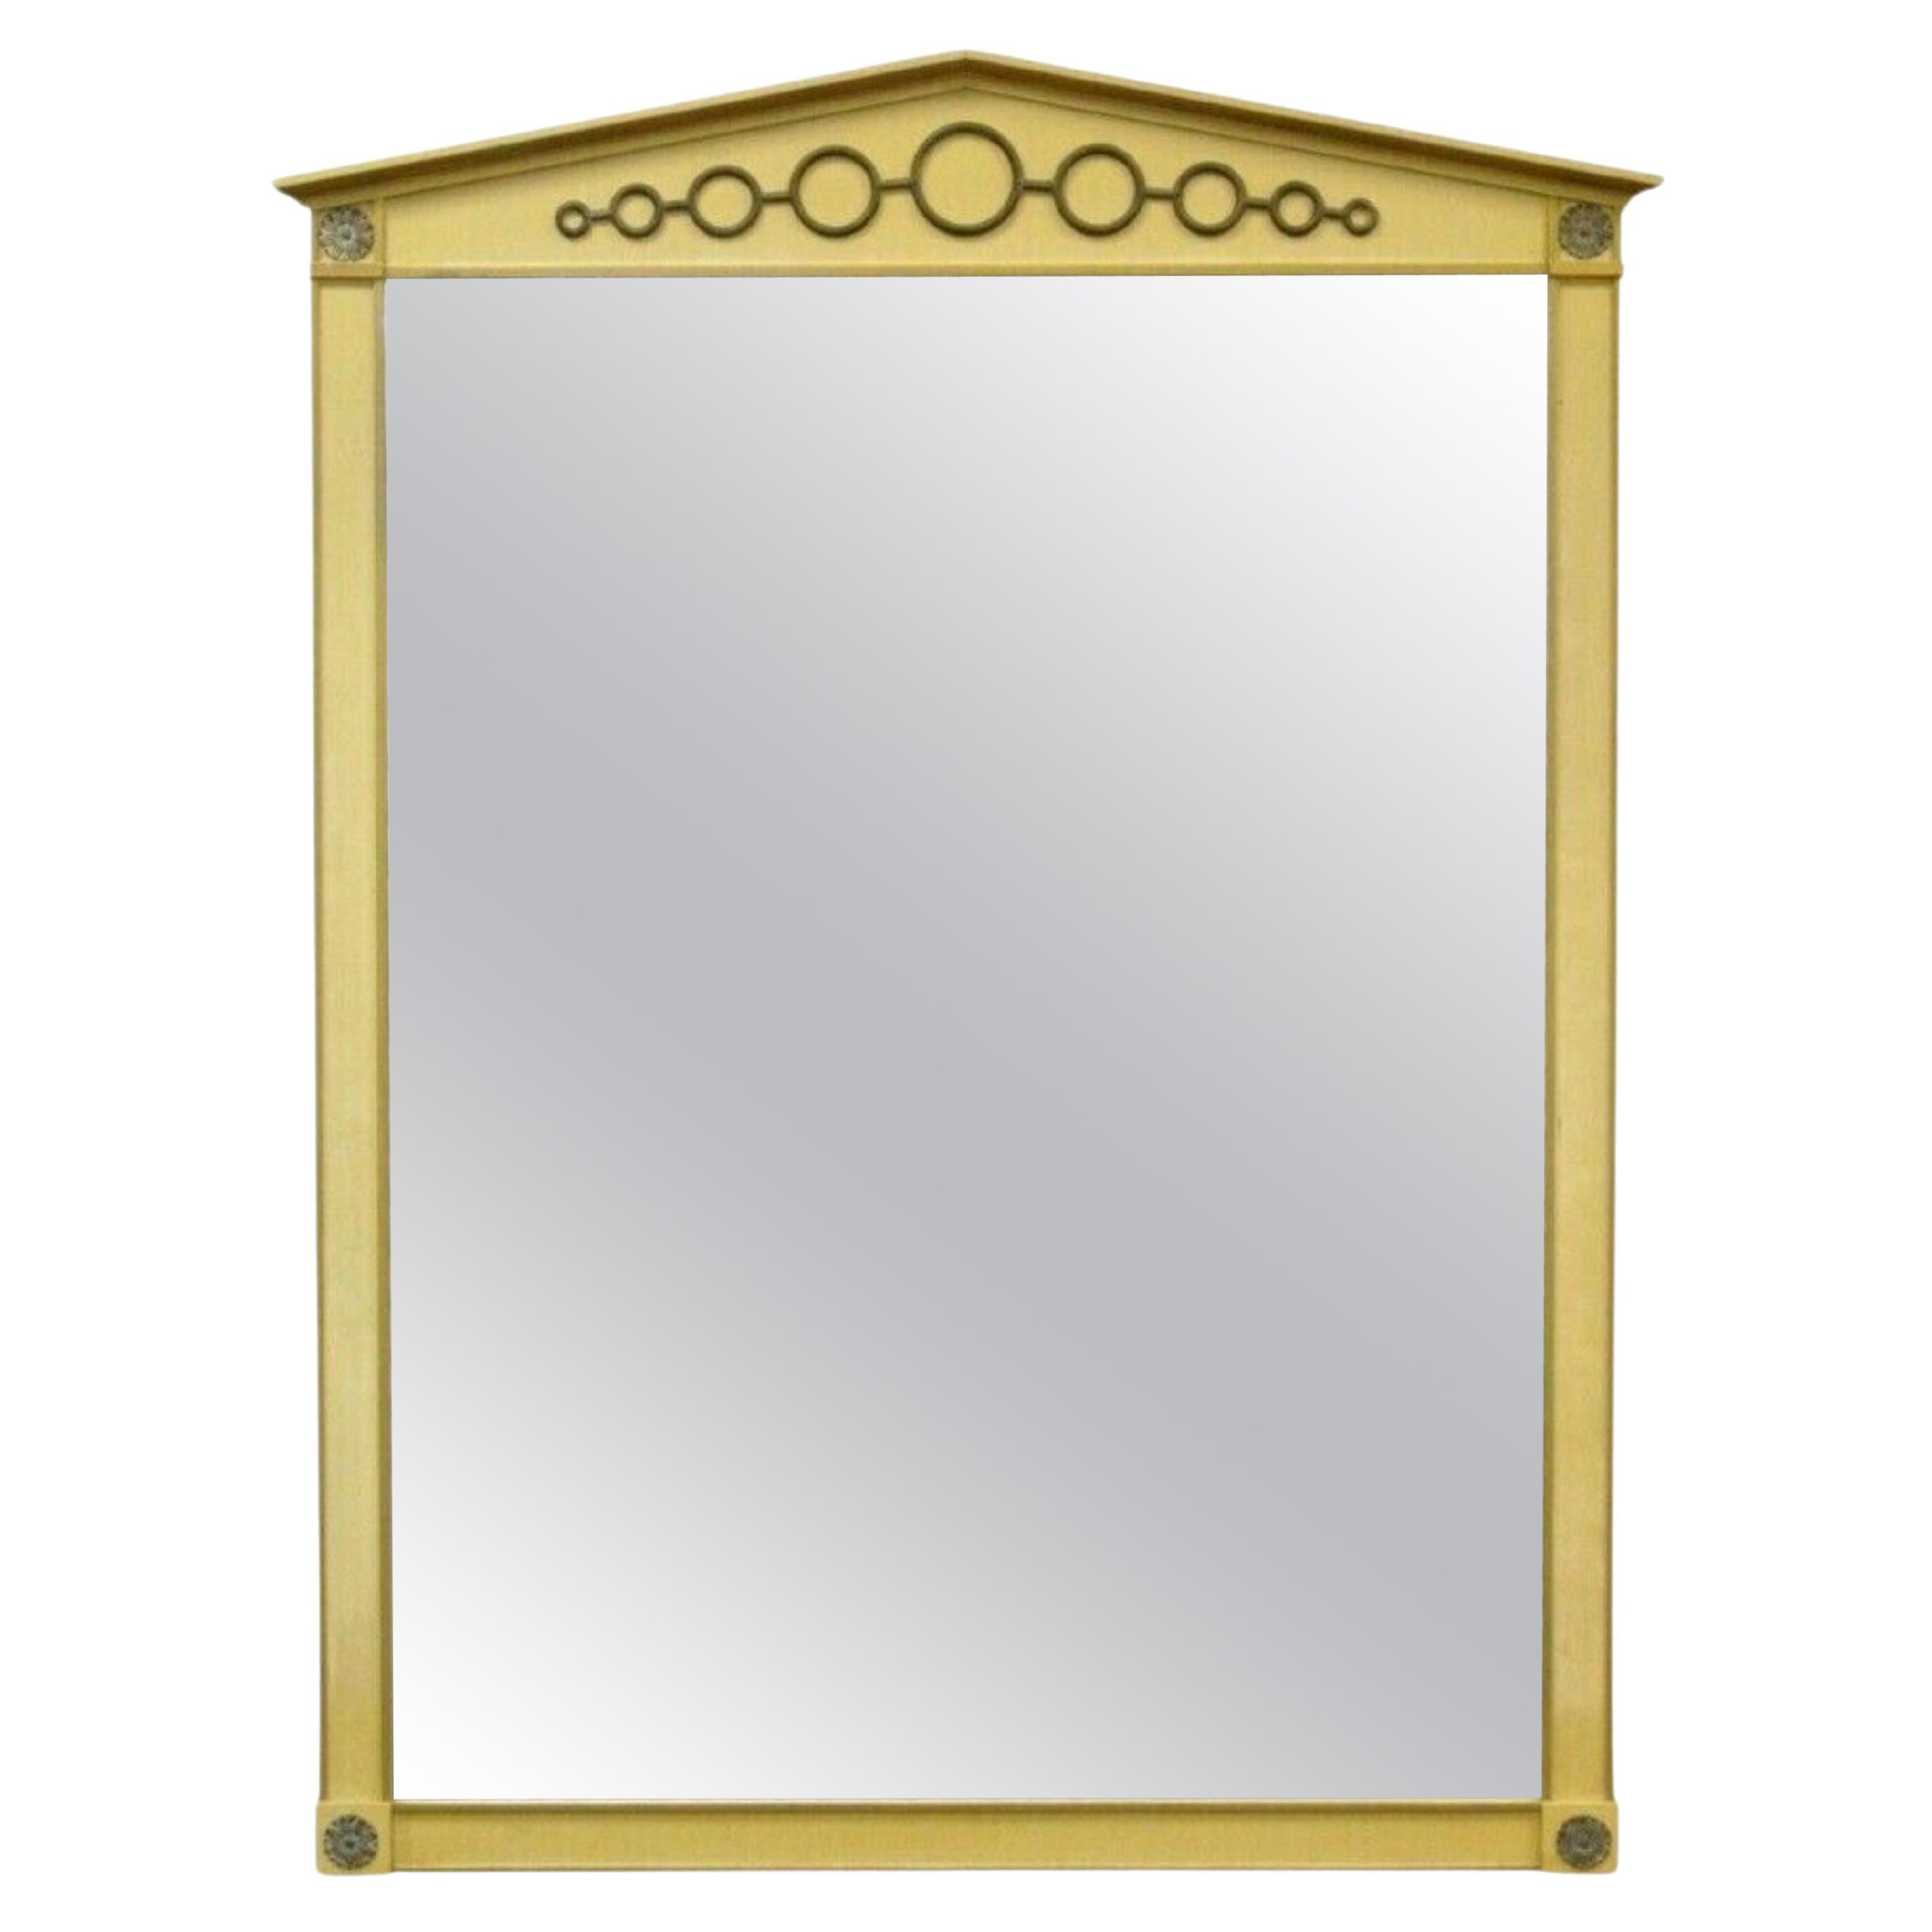 Vintage Hollywood Regency Neoclassical Brass Ring Cream Painted Wall Mirror For Sale